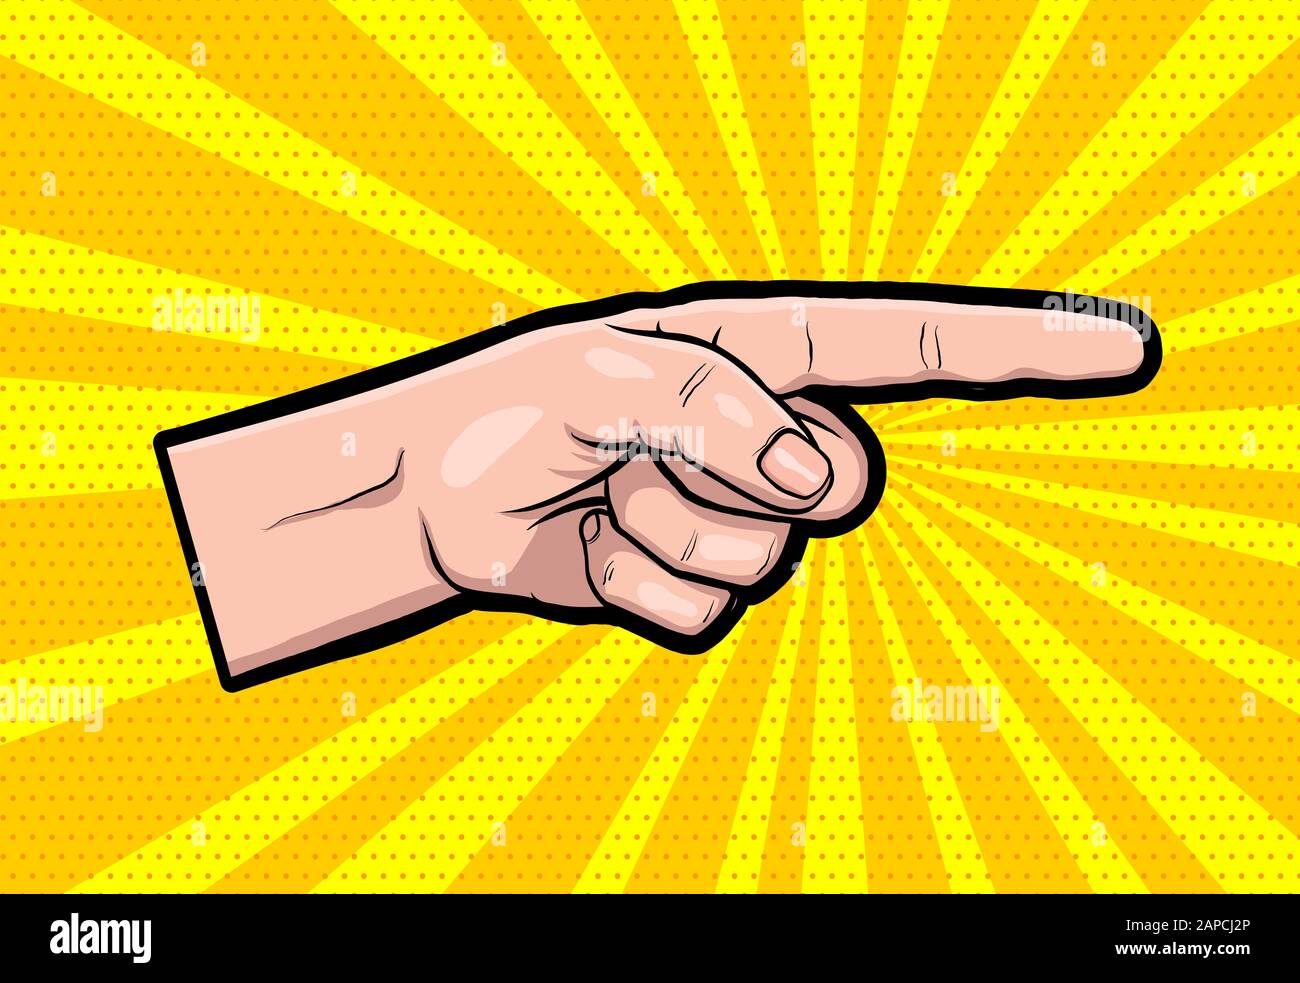 Uncle sam hand in pop art style Stock Vector